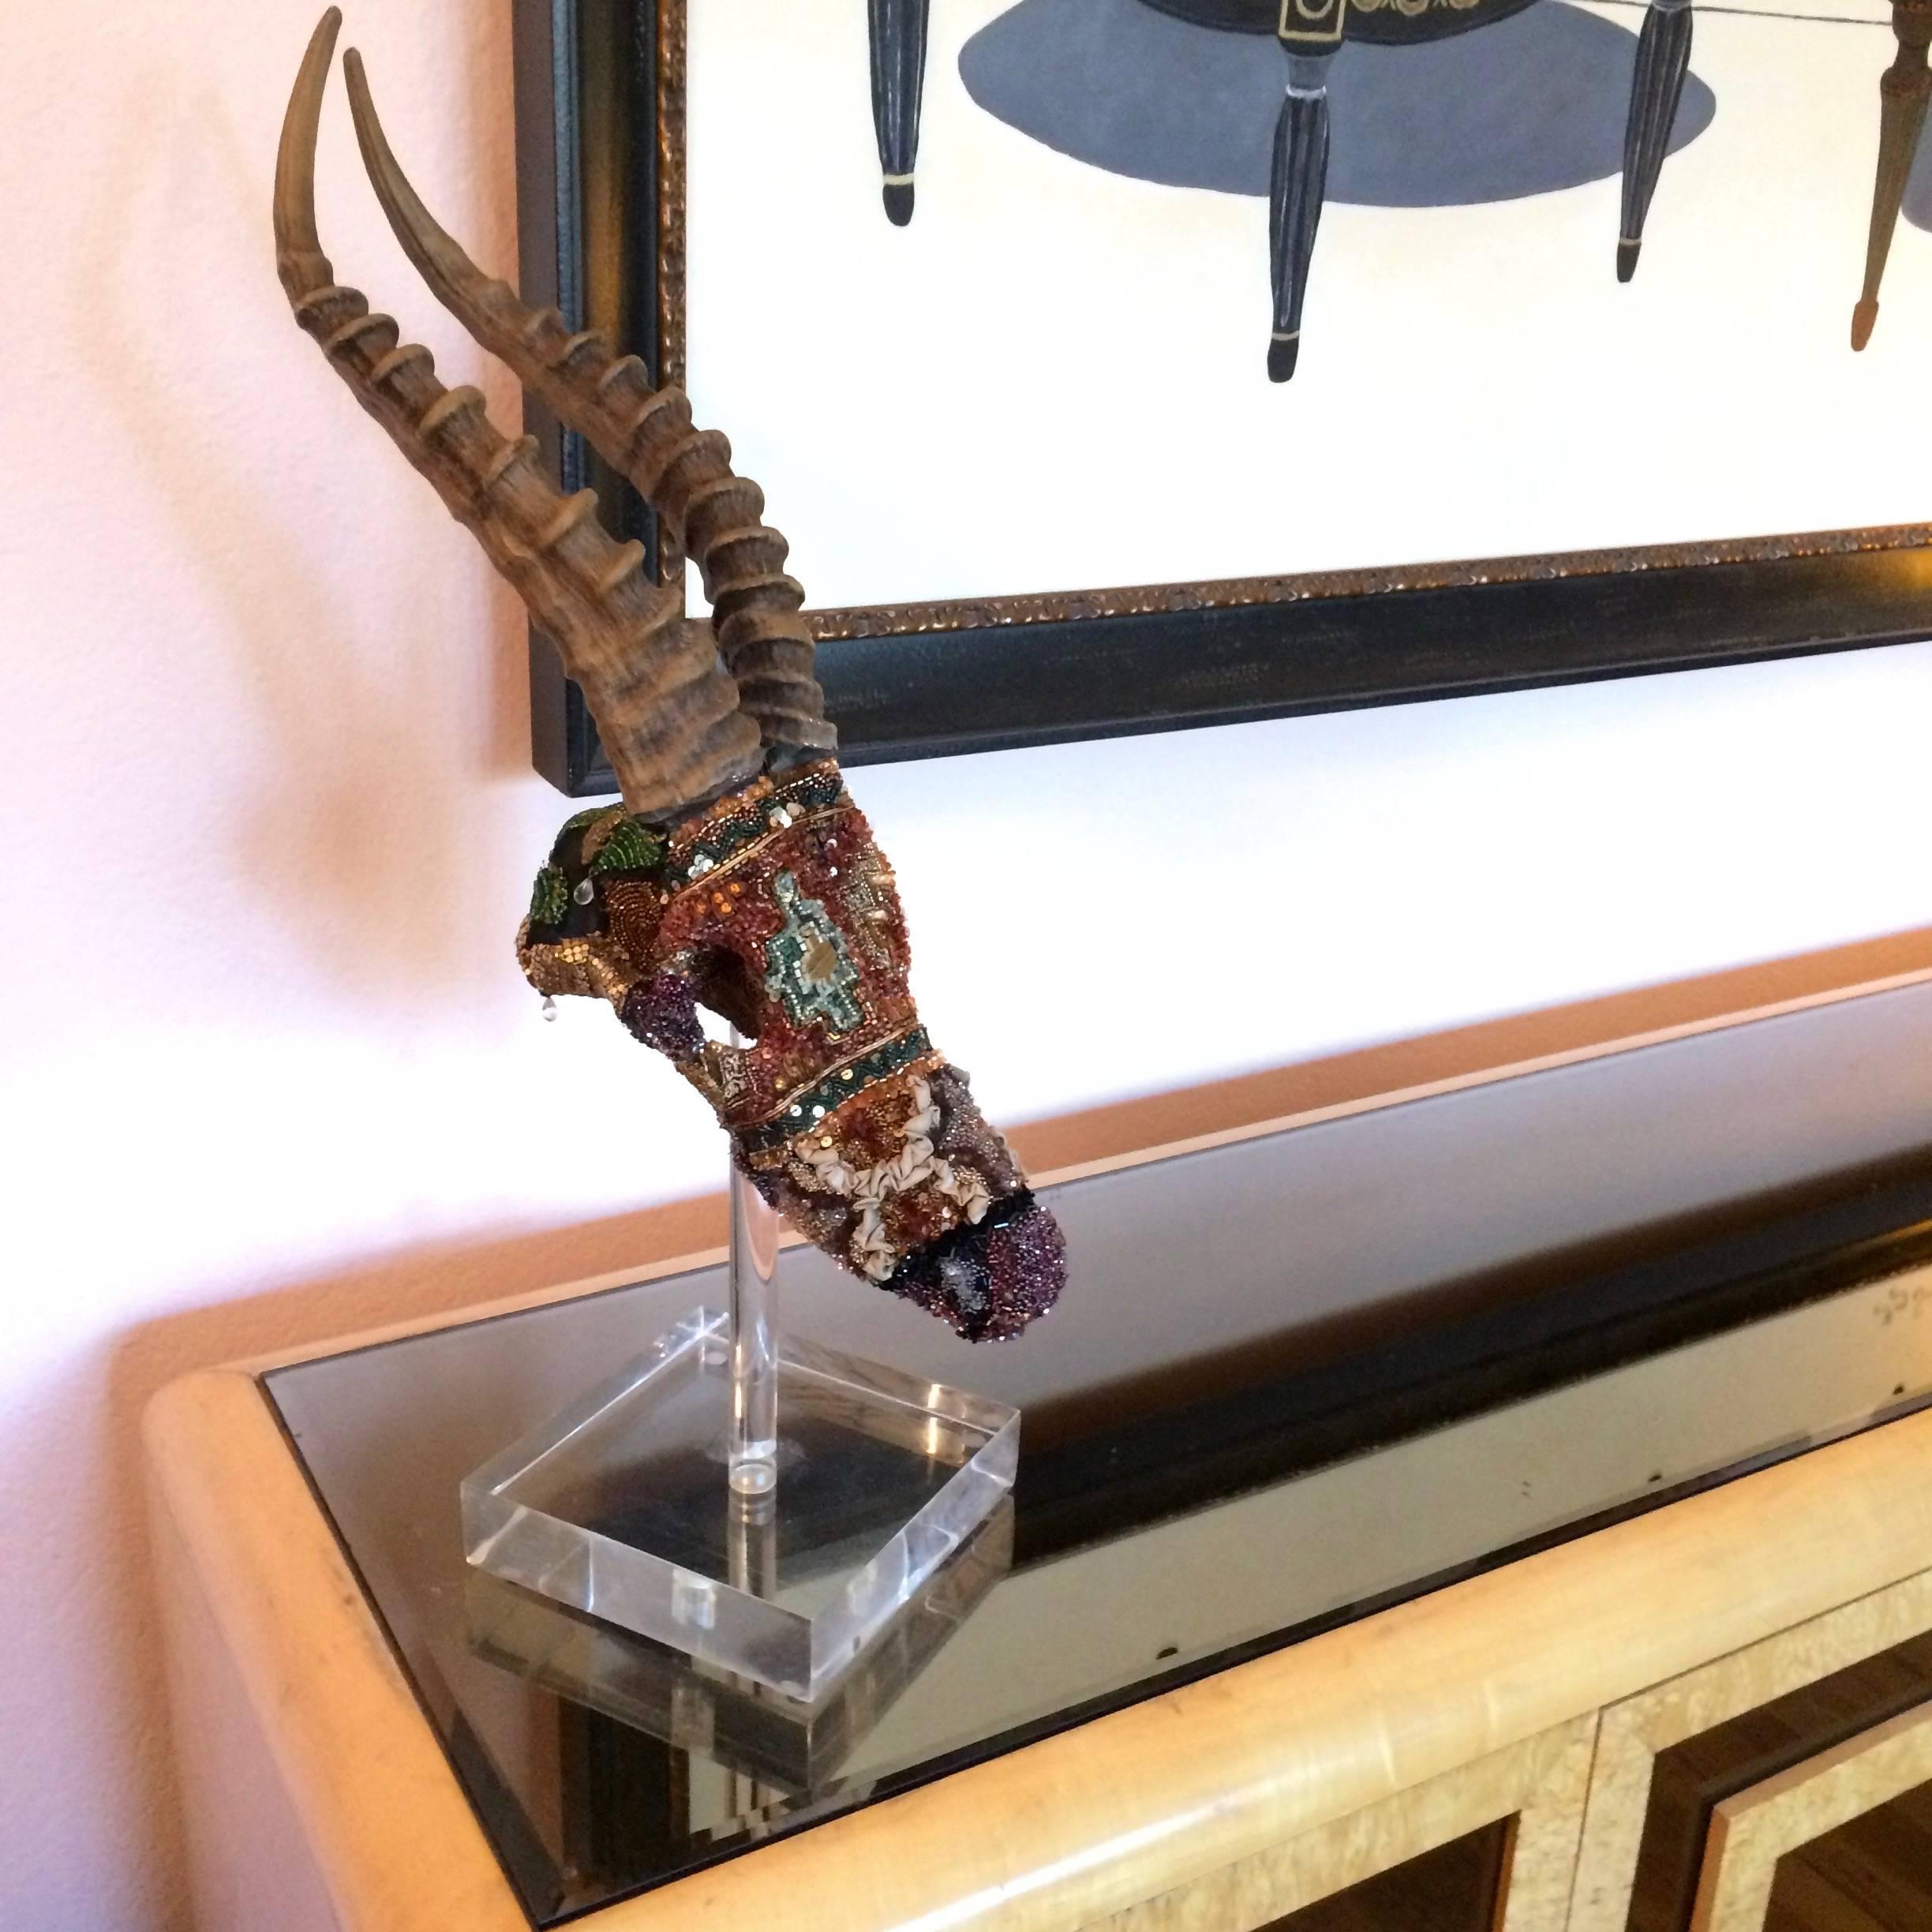 Richly bead encrusted faux skull sculpture adorned with vintage bits and pieces of jewel like fabric, mounted on a Lucite stand.
By mixed media artist Fay Sciarra.